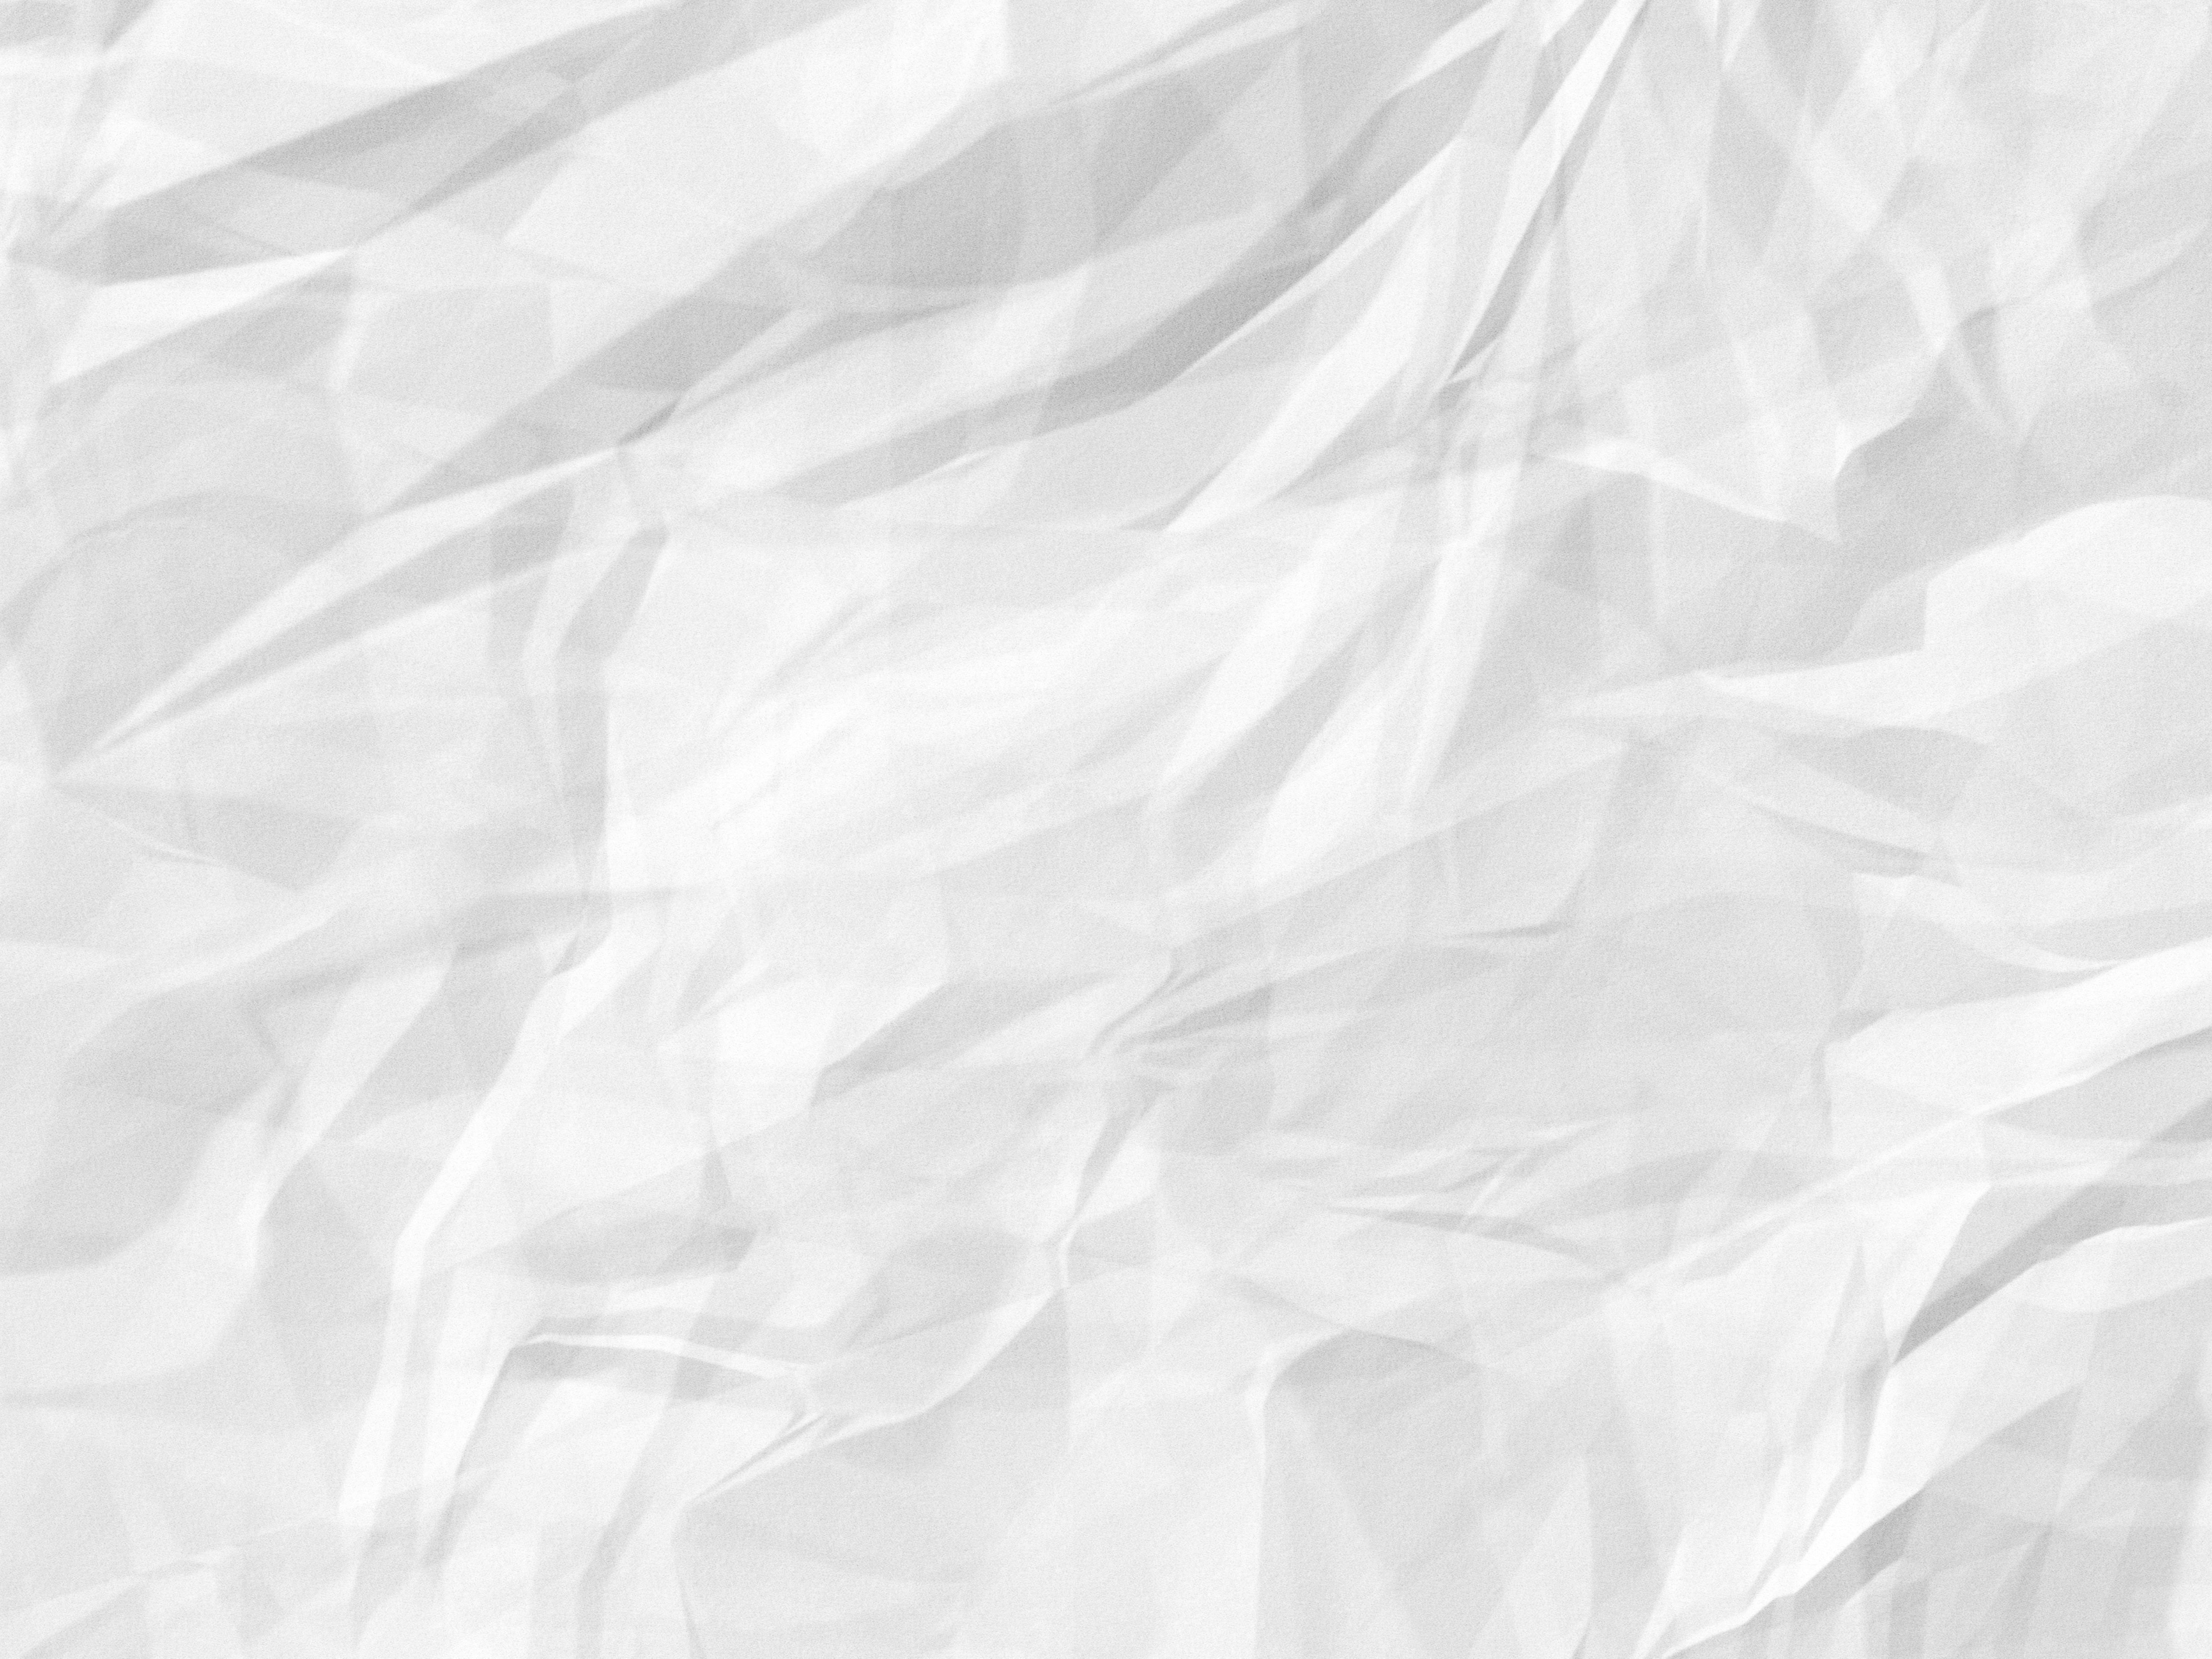 white printing paper #paper #dents #texture K #wallpaper #hdwallpaper #desktop. Crumpled paper textures, Paper texture, Paper texture white